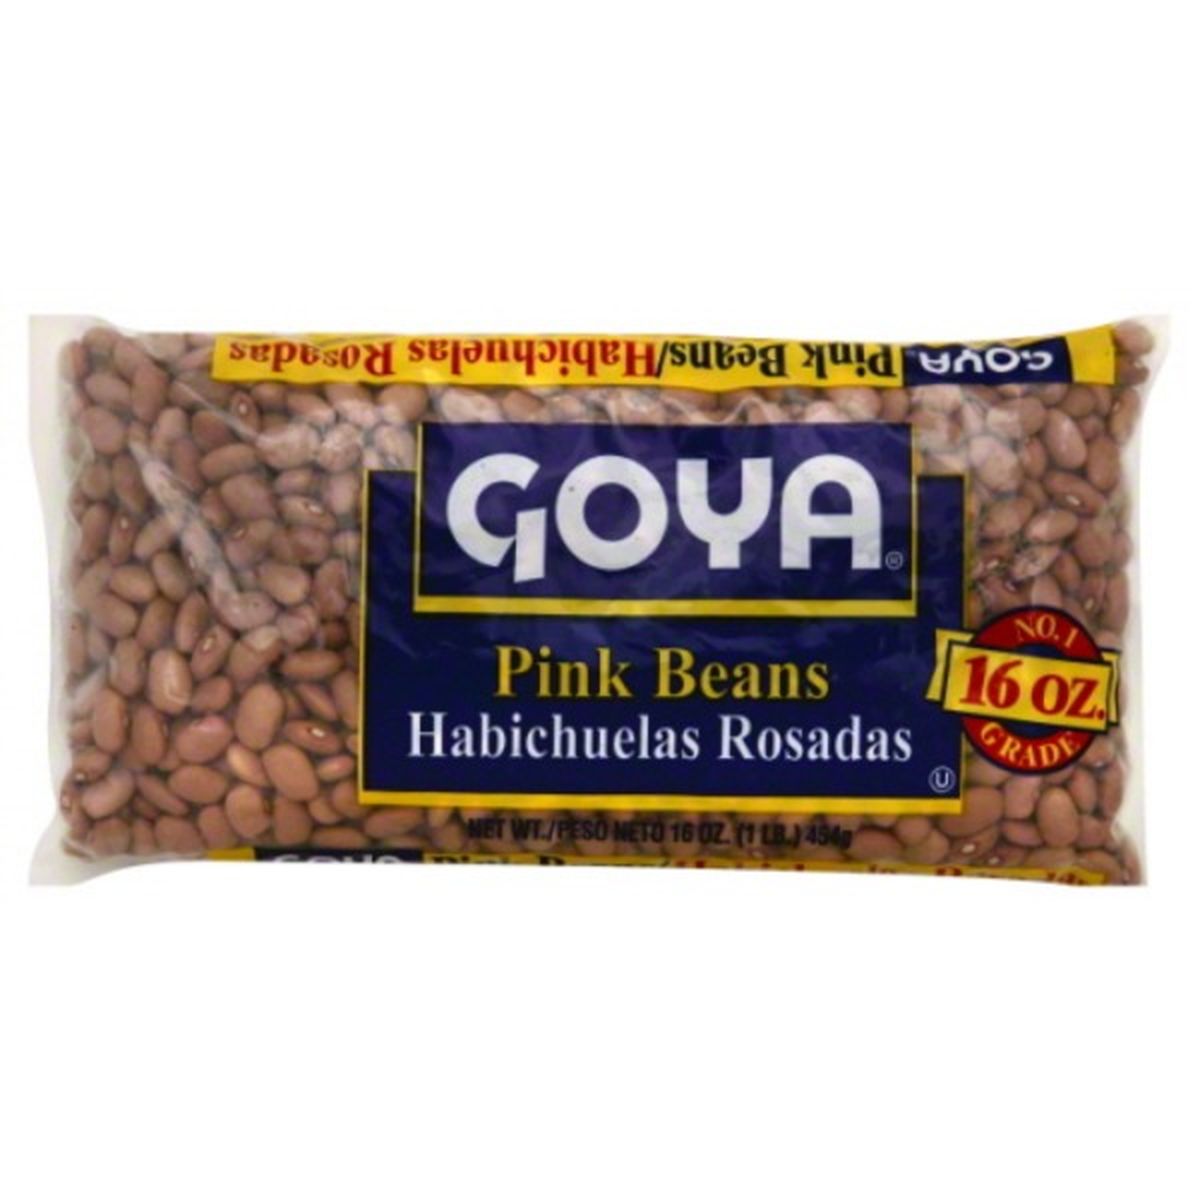 Calories in Goya Pink Beans